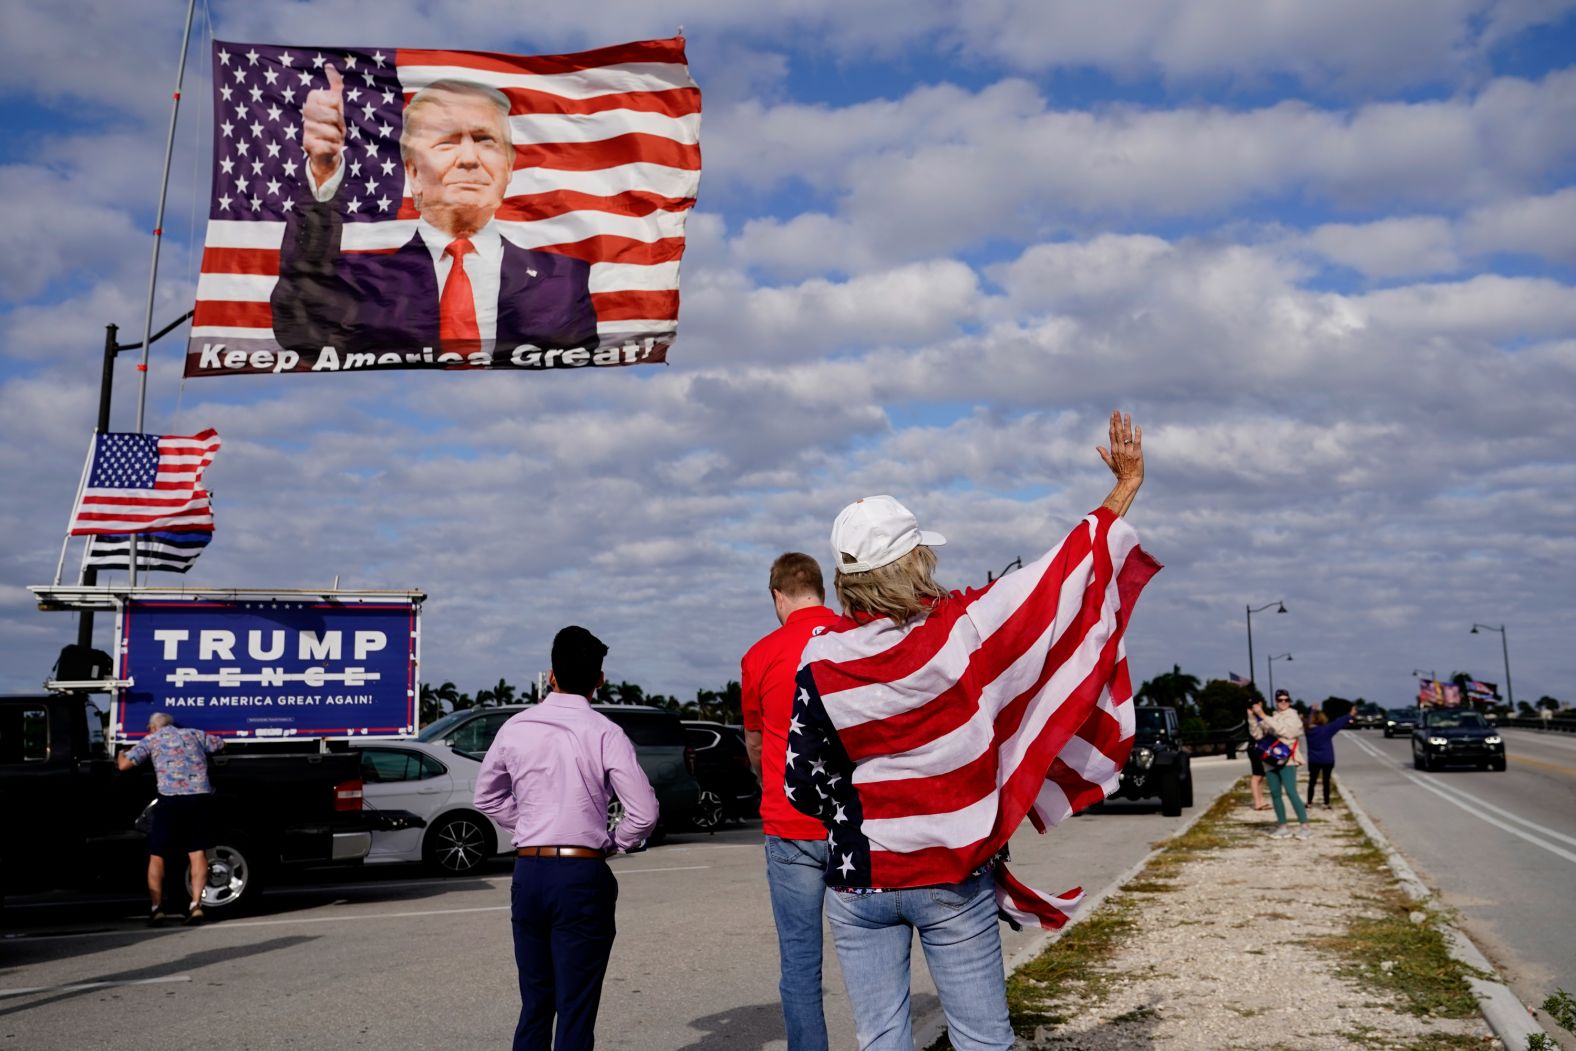 Evelyn Knapp, a supporter of former US President Donald Trump, waves to passersby outside of Trump's Mar-a-Lago estate in Palm Beach, Florida, on Monday, March 20. Trump is <a href="index.php?page=&url=https%3A%2F%2Fwww.cnn.com%2Fpolitics%2Flive-news%2Ftrump-legal-developments-03-23-23%2Findex.html" target="_blank">the subject of several major investigations</a> as he forges ahead with his 2024 presidential campaign, and <a href="index.php?page=&url=https%3A%2F%2Fwww.cnn.com%2F2023%2F03%2F18%2Fpolitics%2Fdonald-trump-manhattan-da-arrest-protests%2Findex.html" target="_blank">he said last weekend that he expected to be arrested</a> in connection with the yearslong investigation into a hush money scheme involving adult film actress Stormy Daniels. But as of Thursday, no decisions on charges had been made by Manhattan district attorney Alvin Bragg.